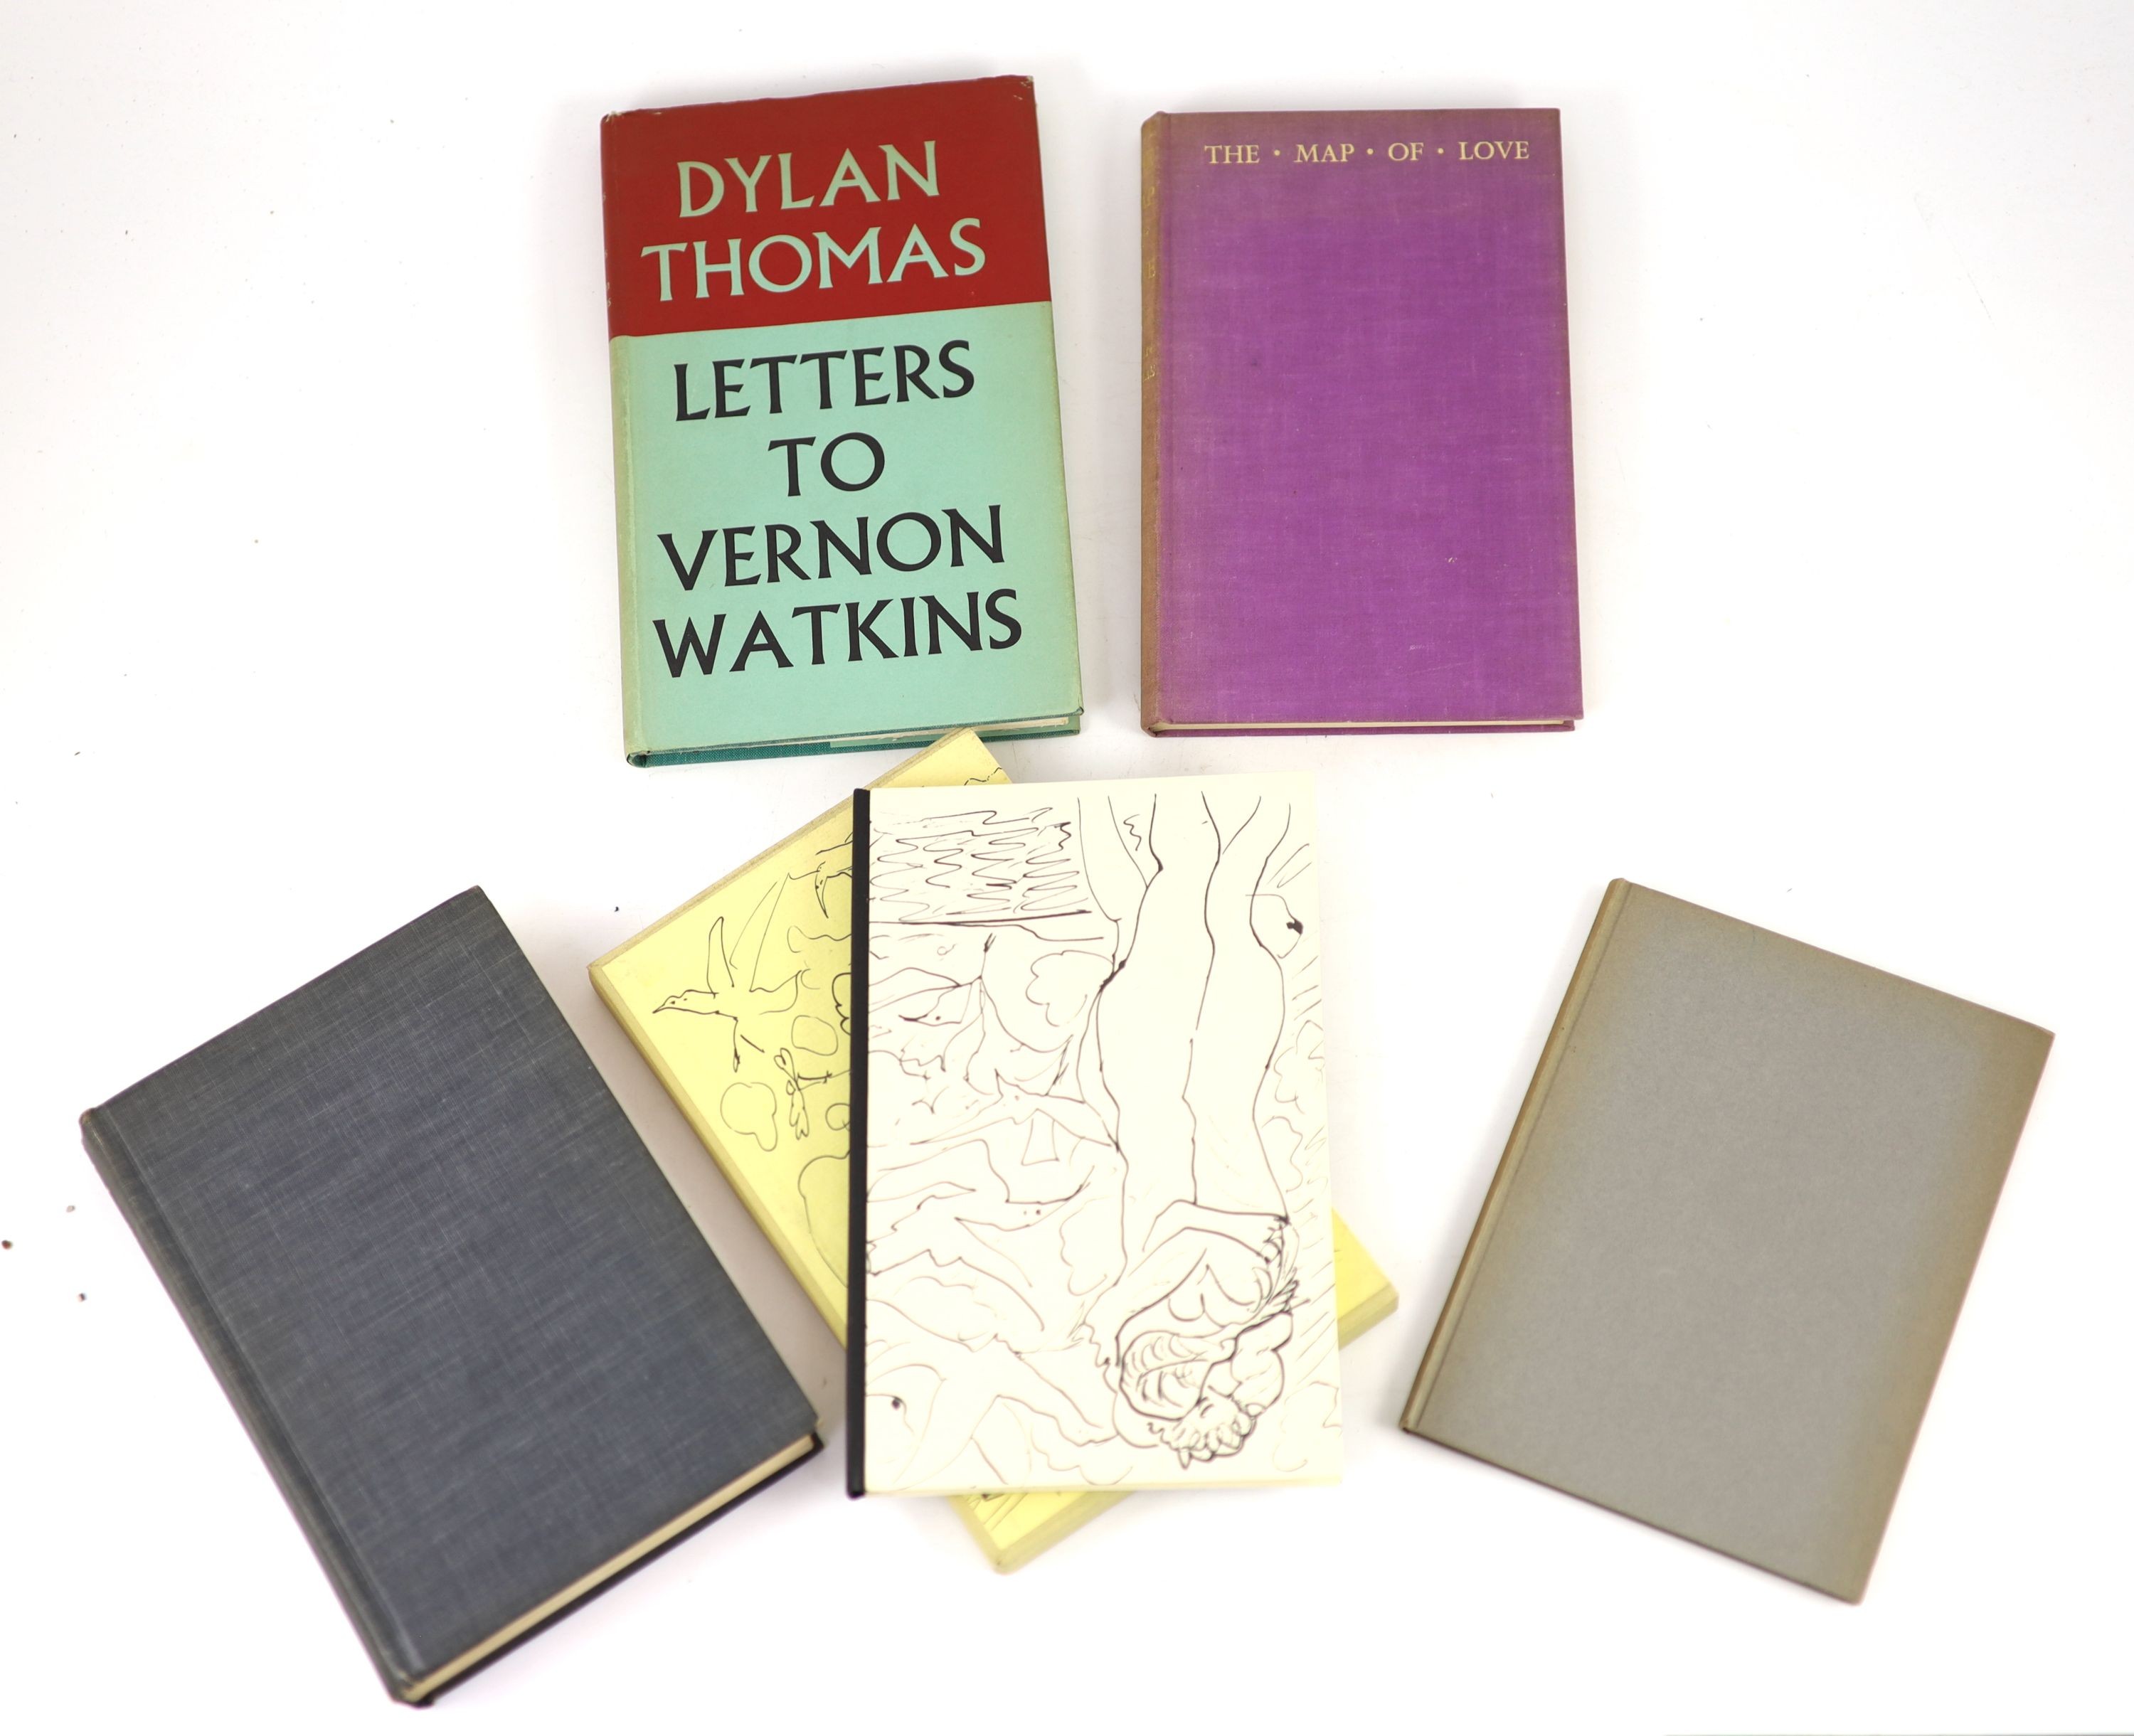 Thomas, Dylan - 5 works by, or about, consisting - Letters to Vernon Watkins, 8vo, cloth, in clipped d/j, London, 1957; The Map of Love, 8vo, 1st issue in mauve cloth, London, 1939; Twenty-Five Poems, 8vo, cloth, London,